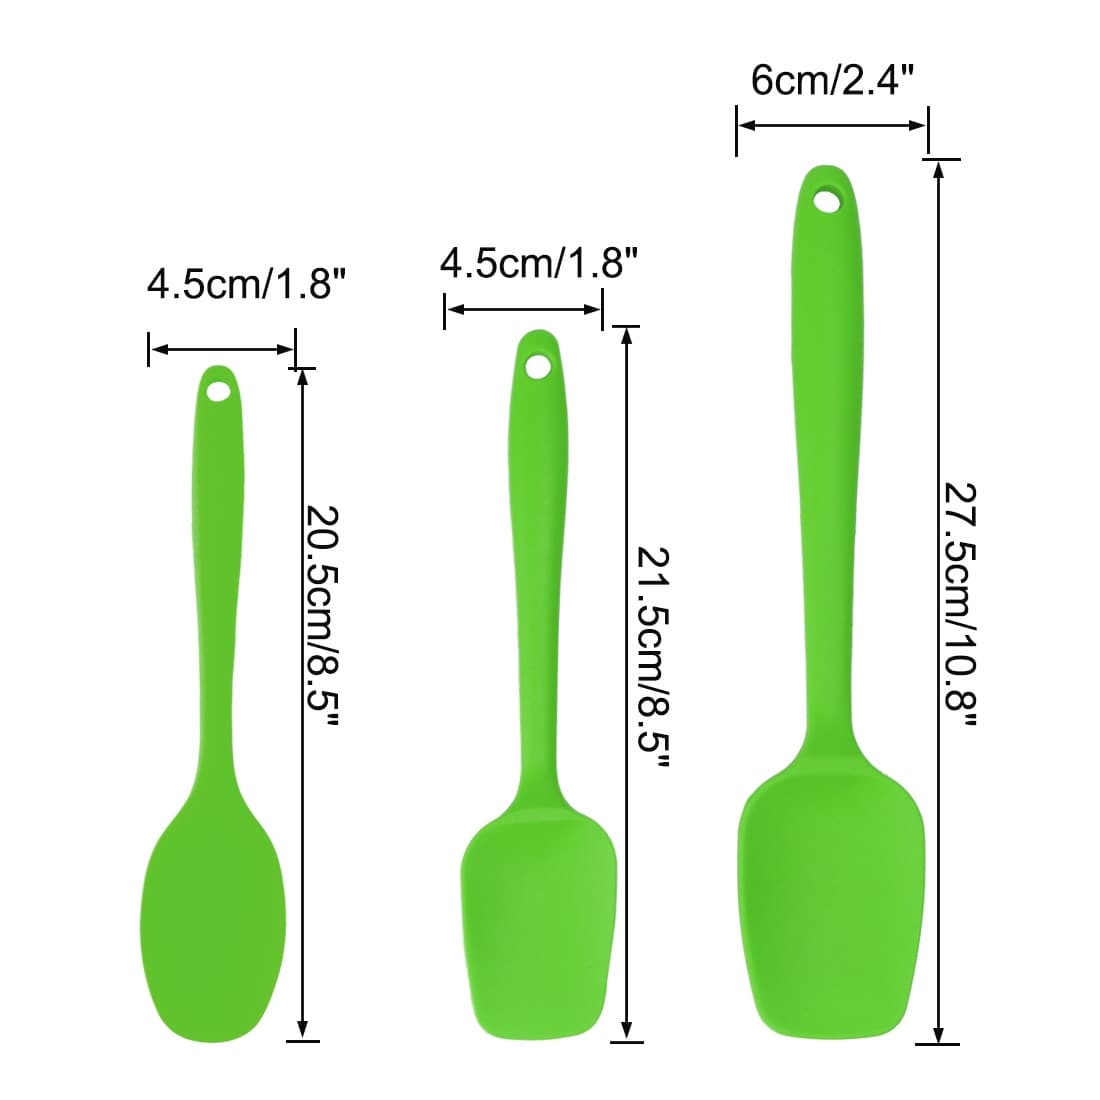 Visland 3 Piece Silicone Spatula Set, High Heat Resistant, Seamless  Flexible Rubber Kitchen Cooking Mixing Baking Scraper for Cooking, Baking,  and Mixing 